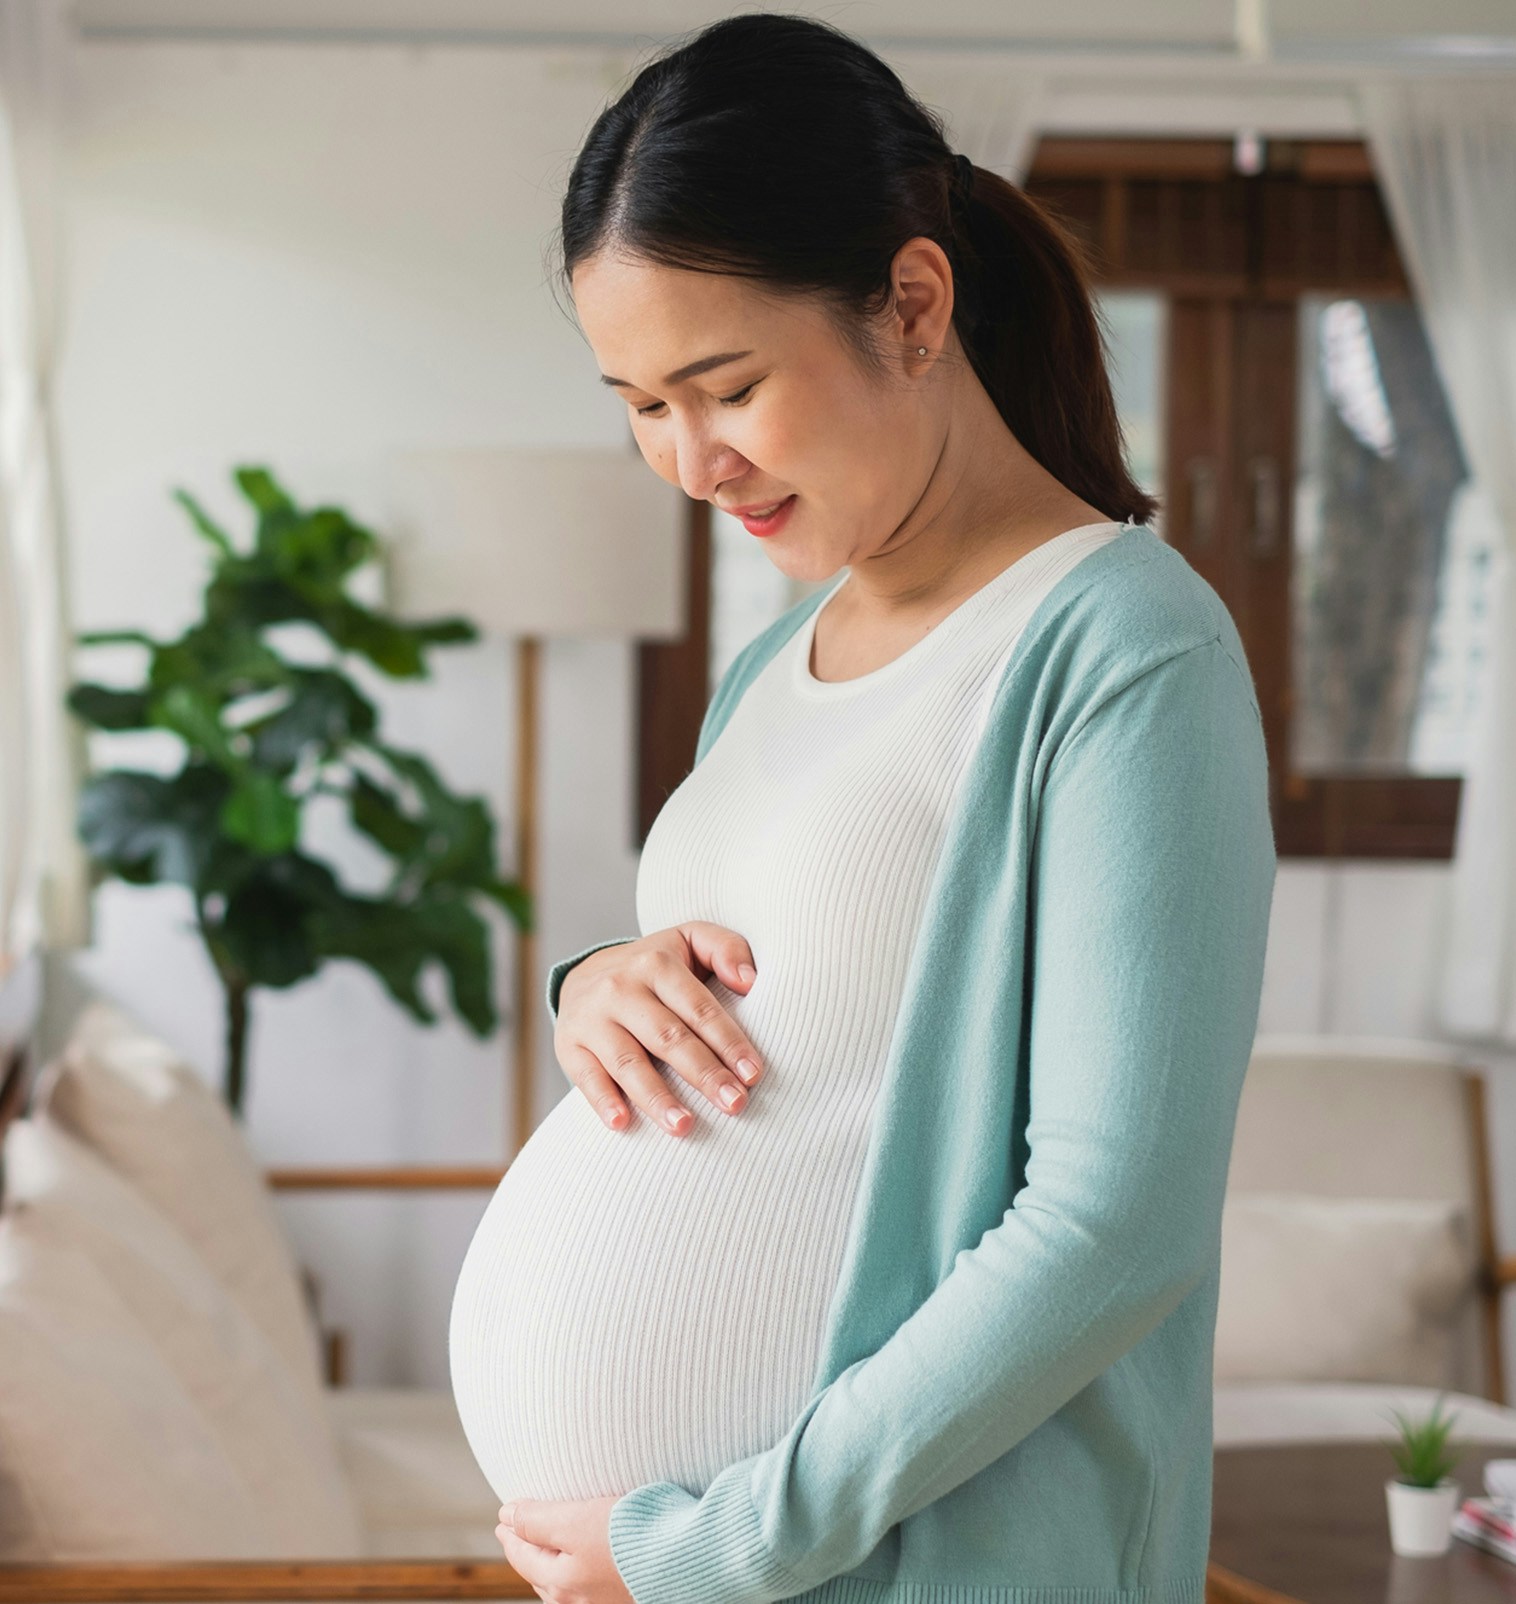 Pregnant woman happily holding her stomach